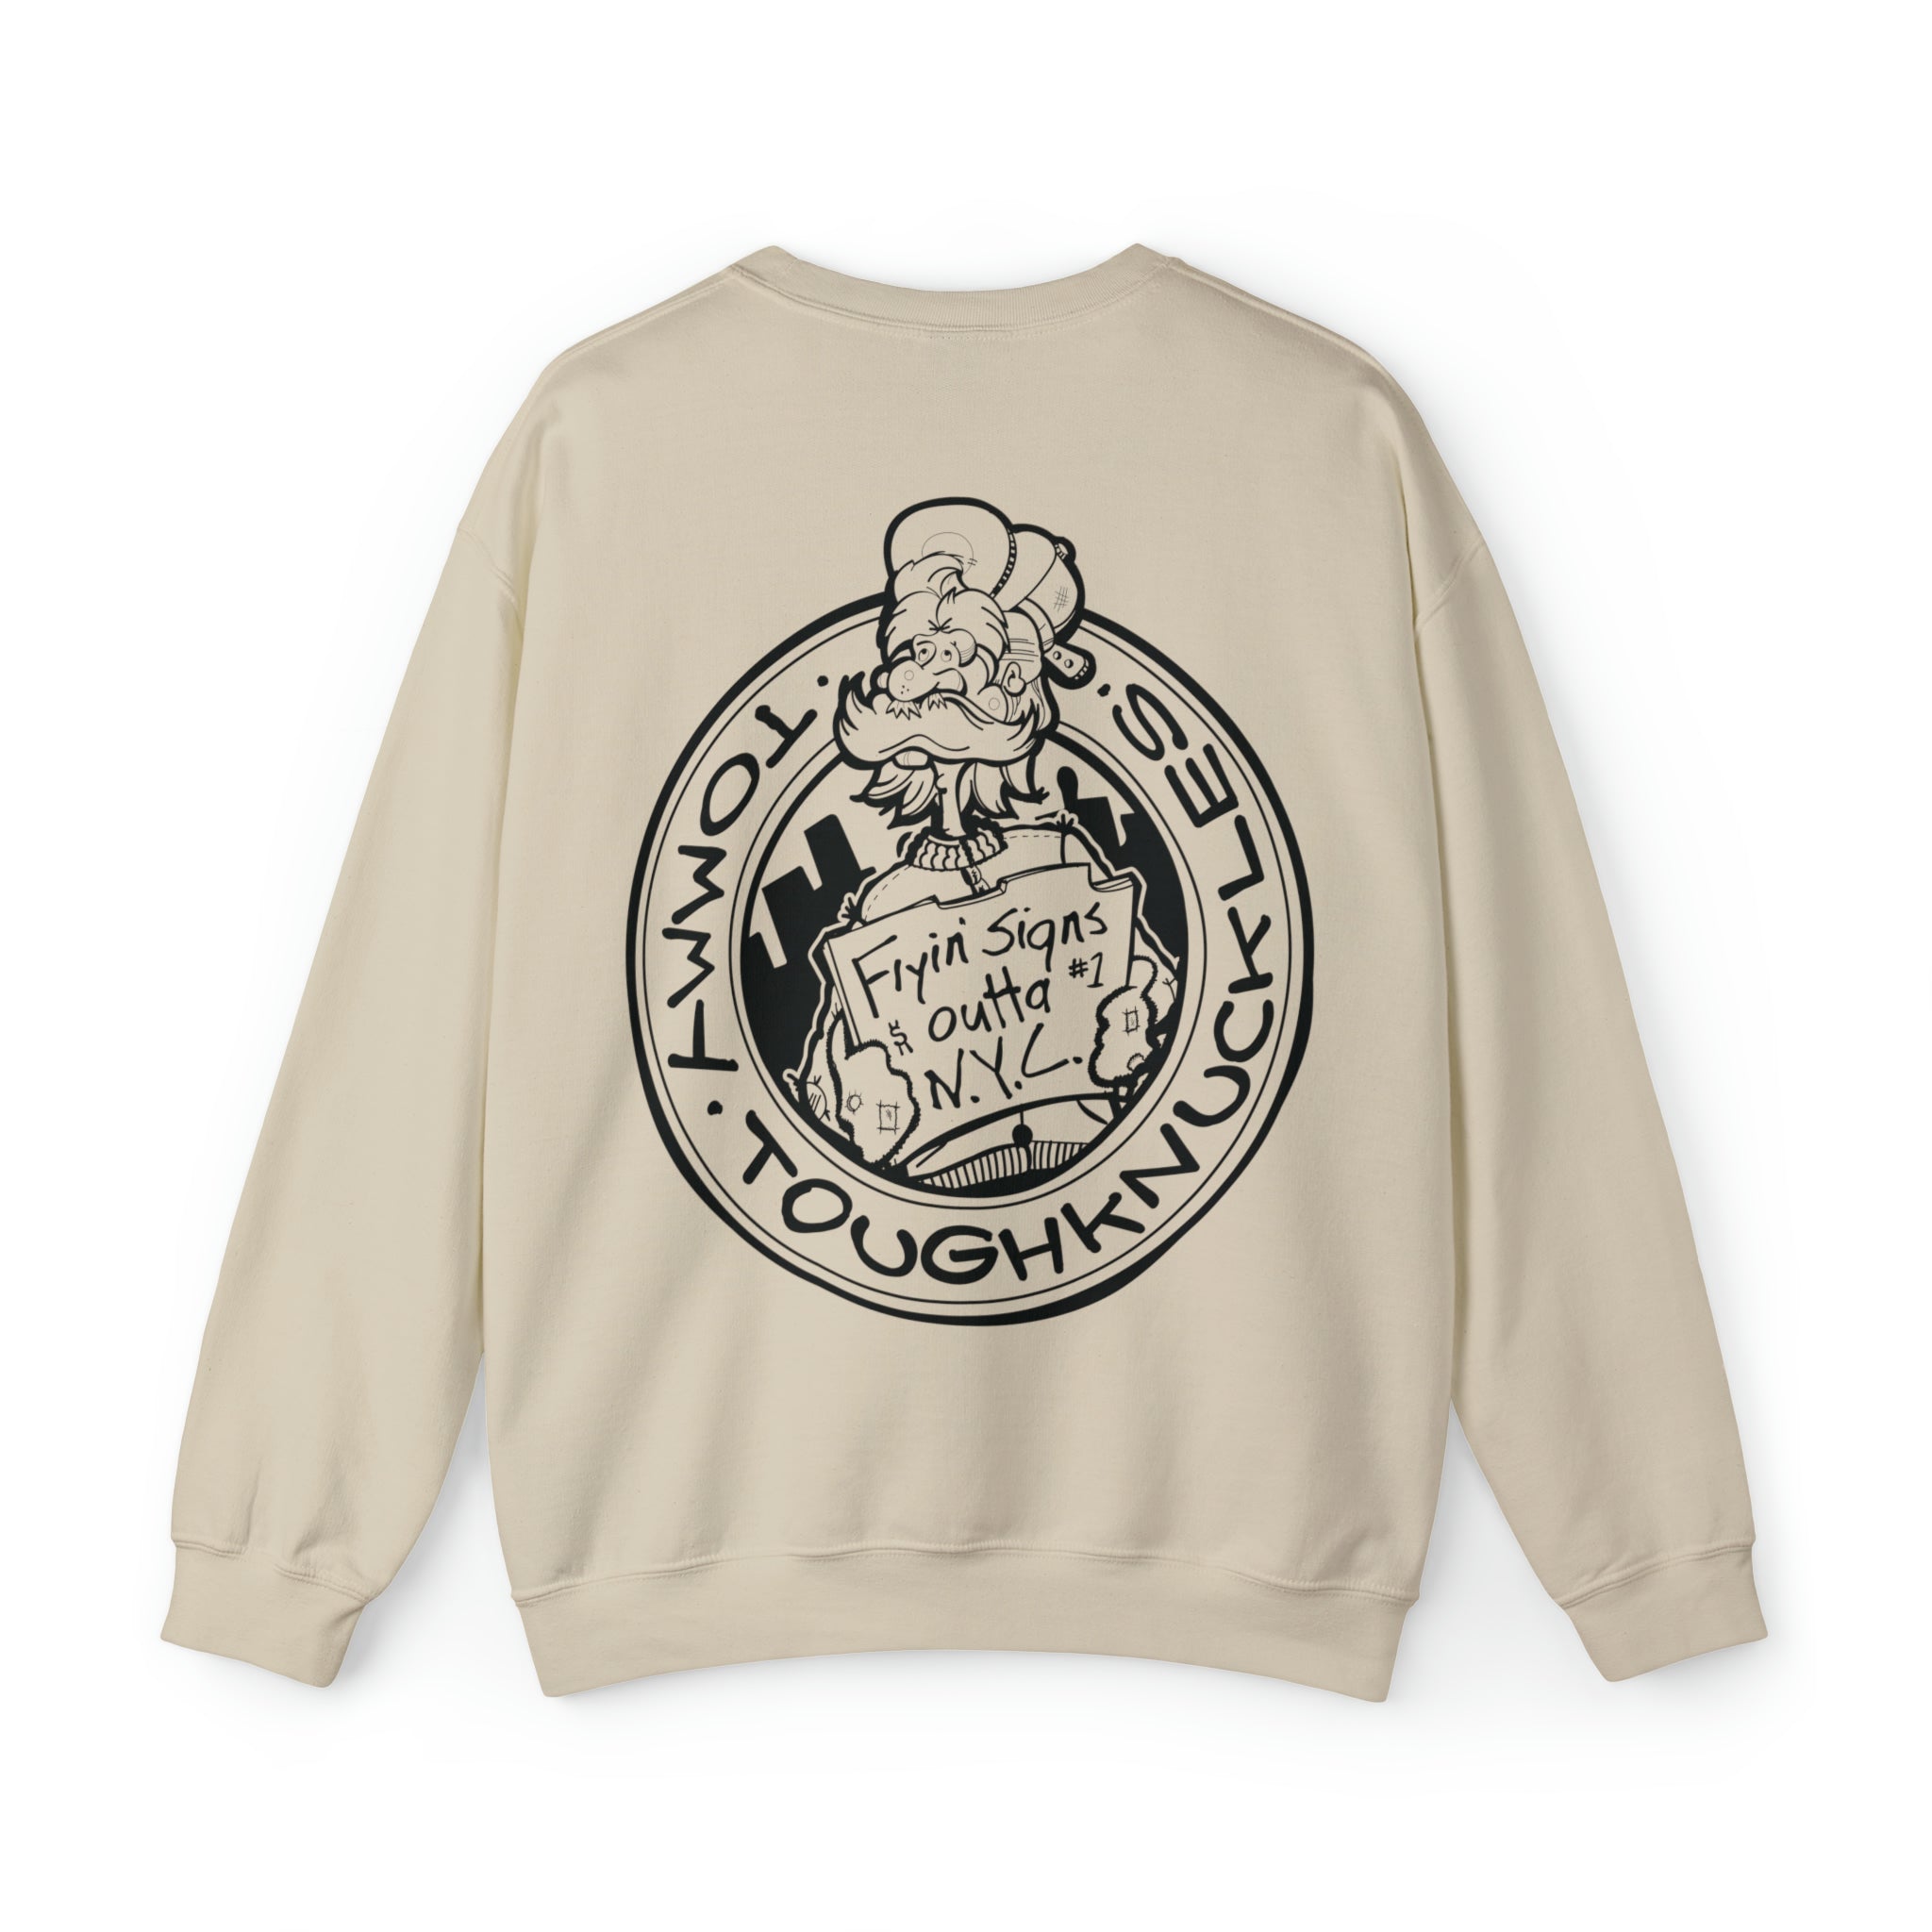 Tommy ToughKnuckles - Crew Neck – Johnny Hamcheck